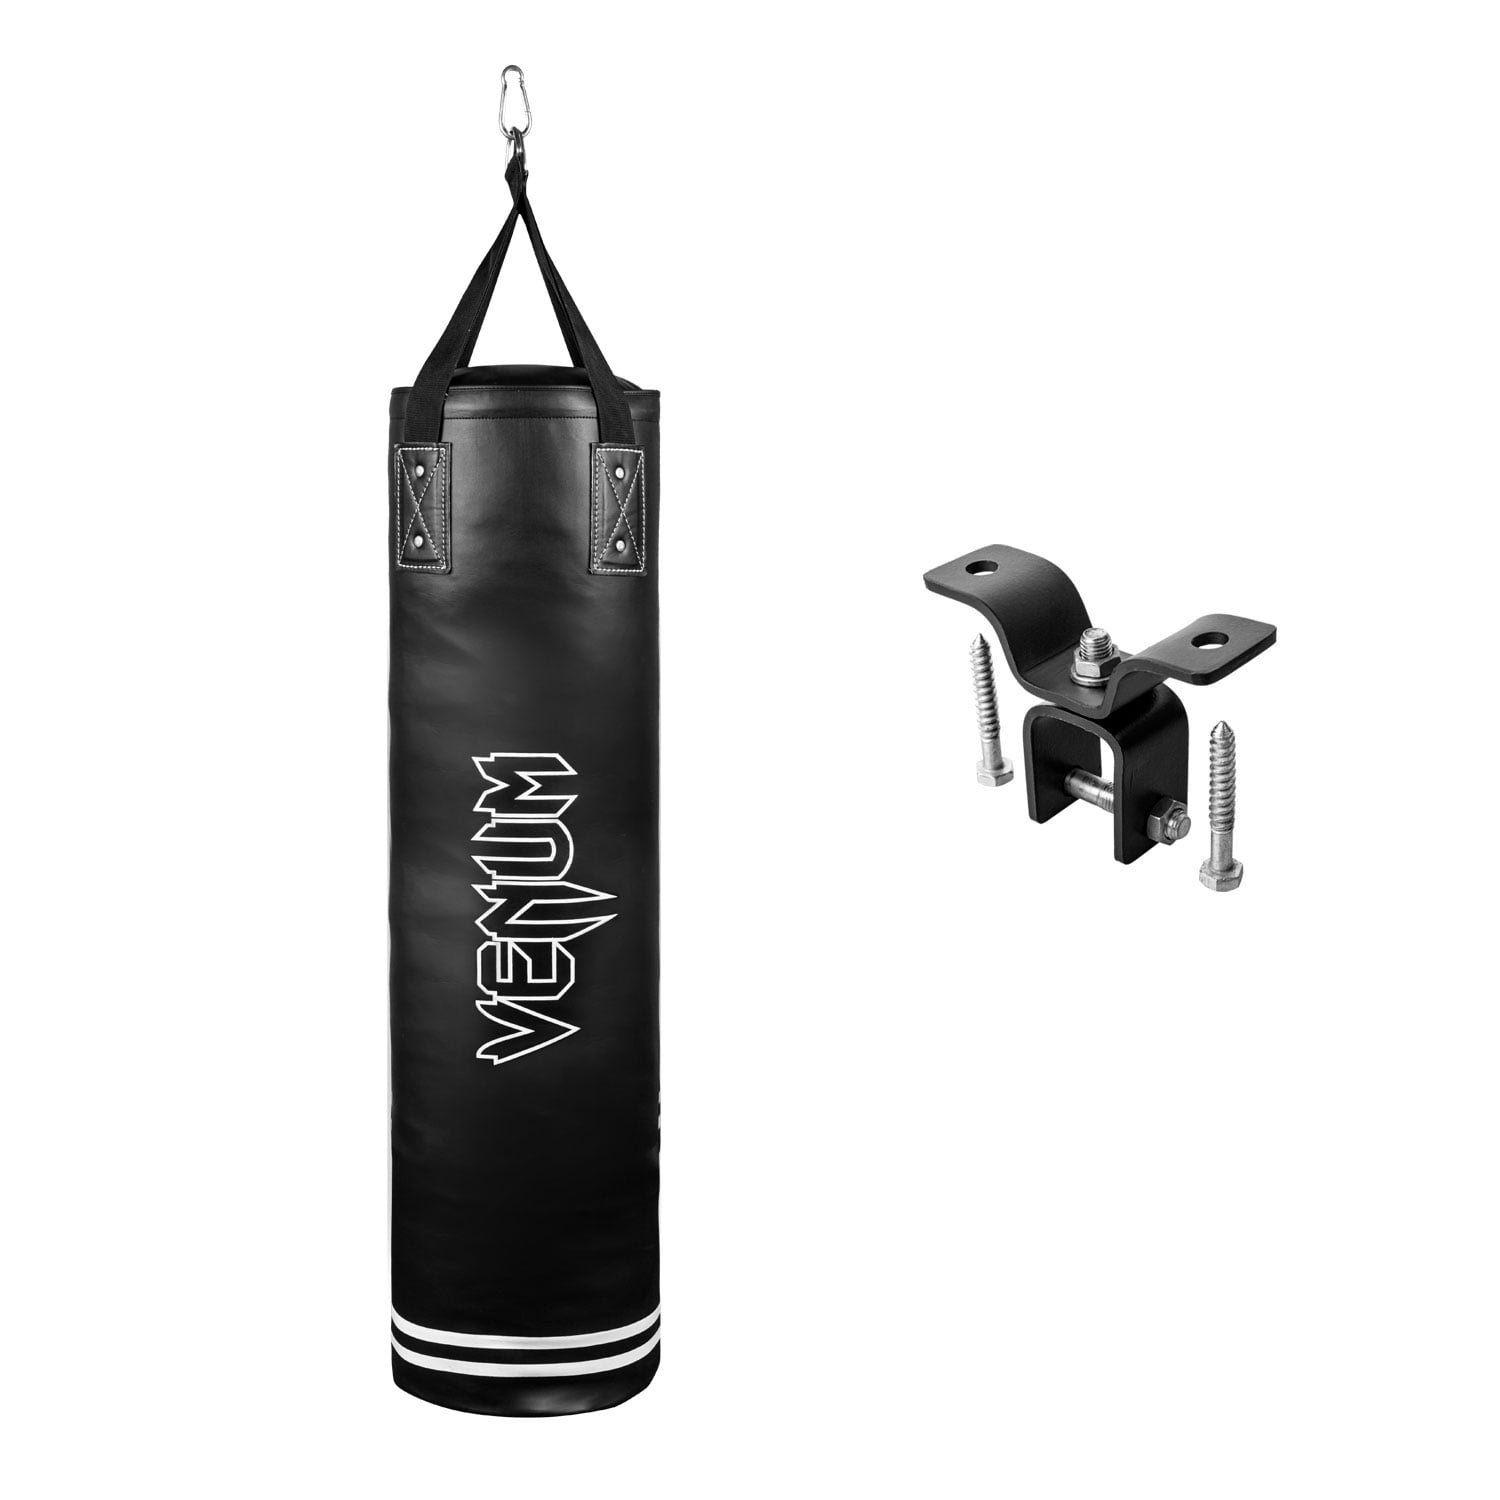 How to Kick a Punching Bag | livestrong